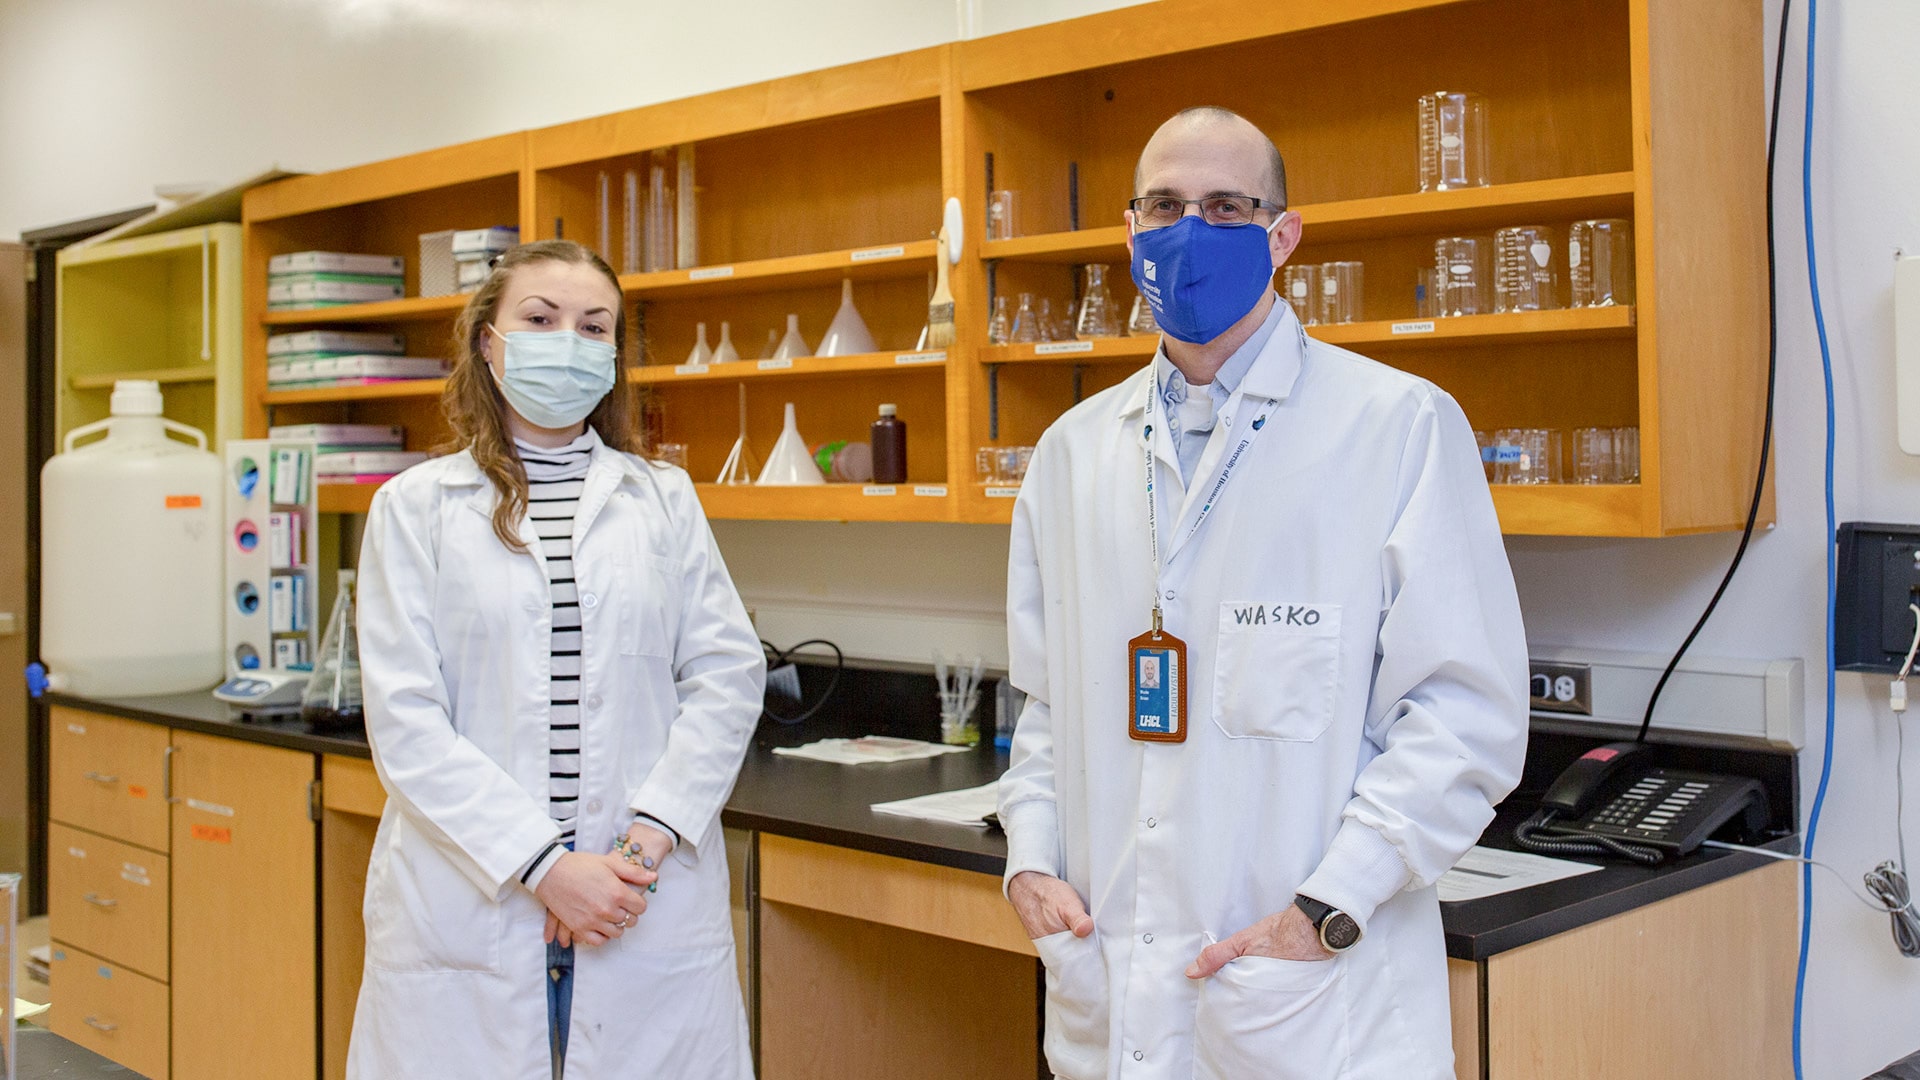 A student and professor in lab coats at a UHCL science lab